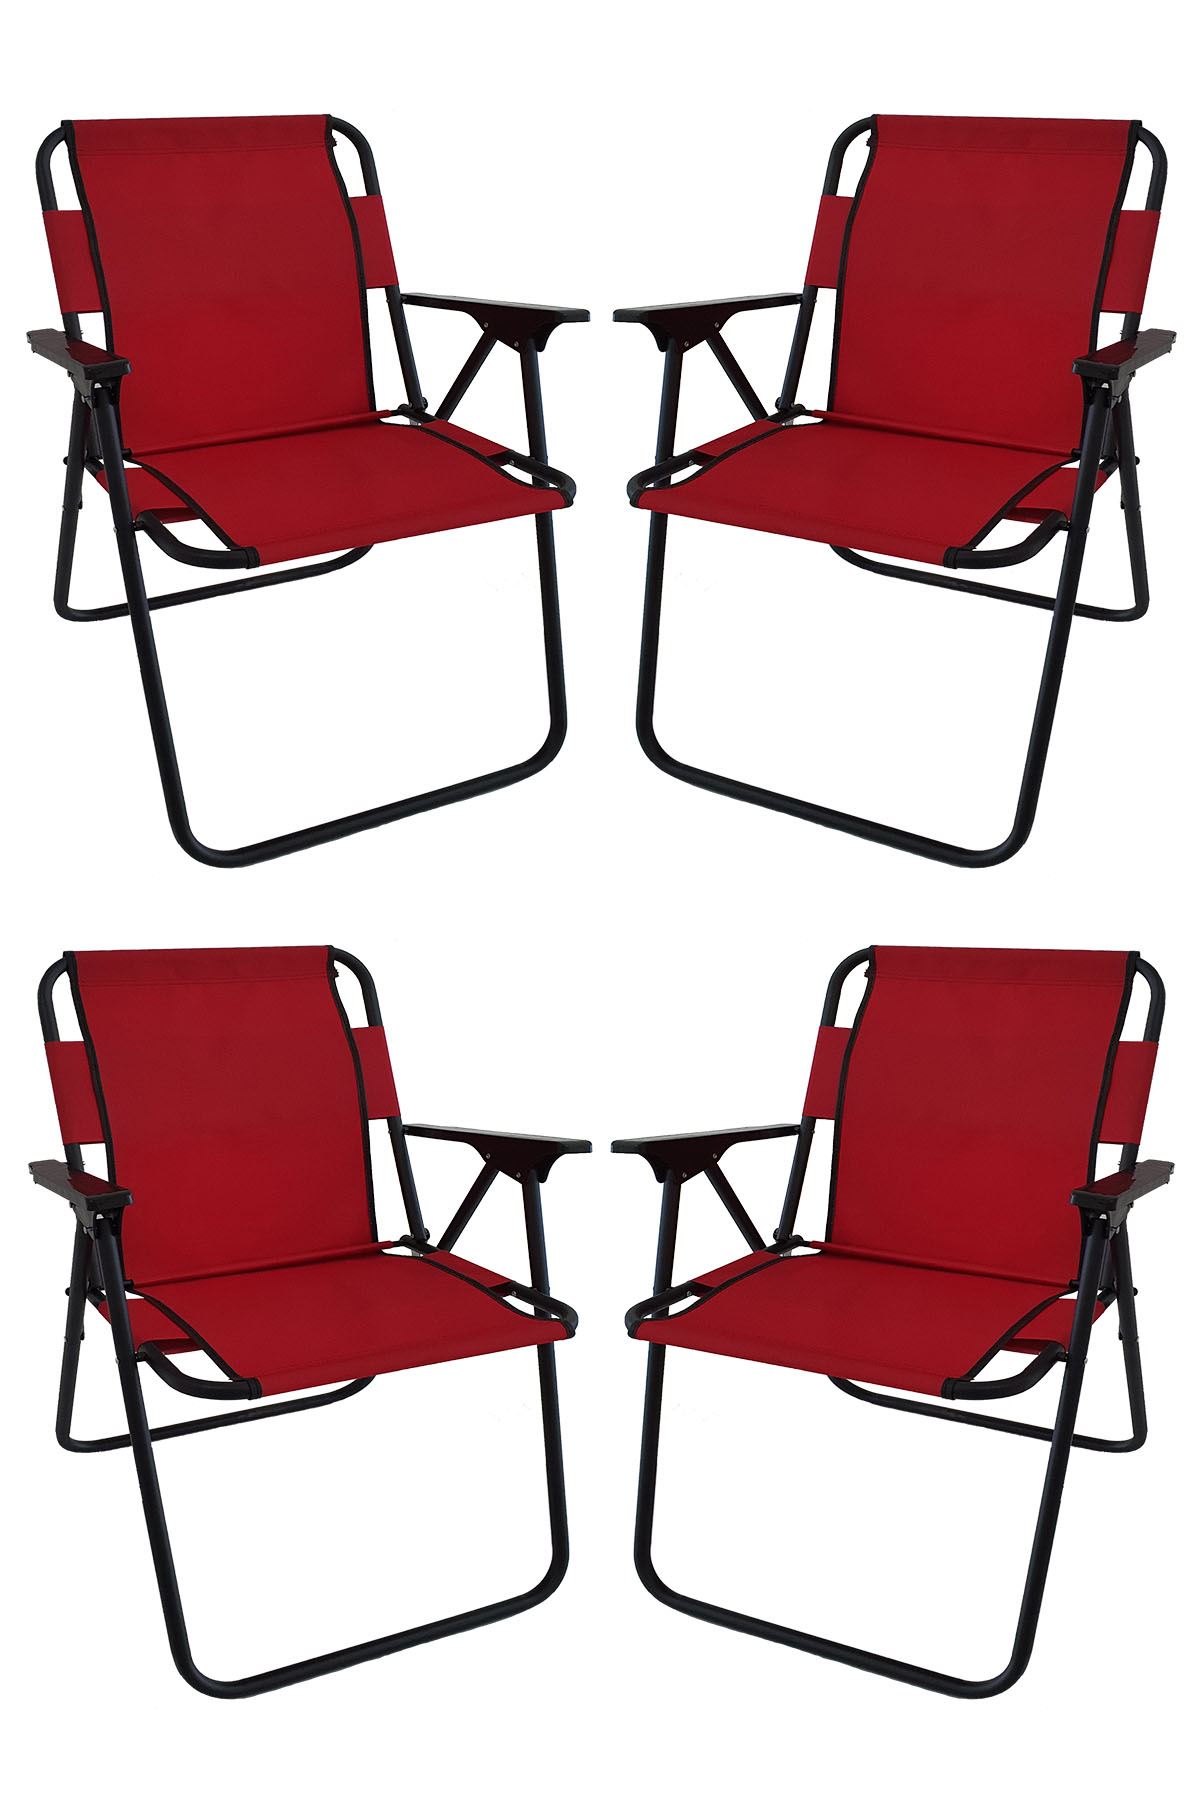 Bofigo 60X80 Granite Patterned Folding Table + 4 Pieces Folding Chair Camping Set Garden Set Red